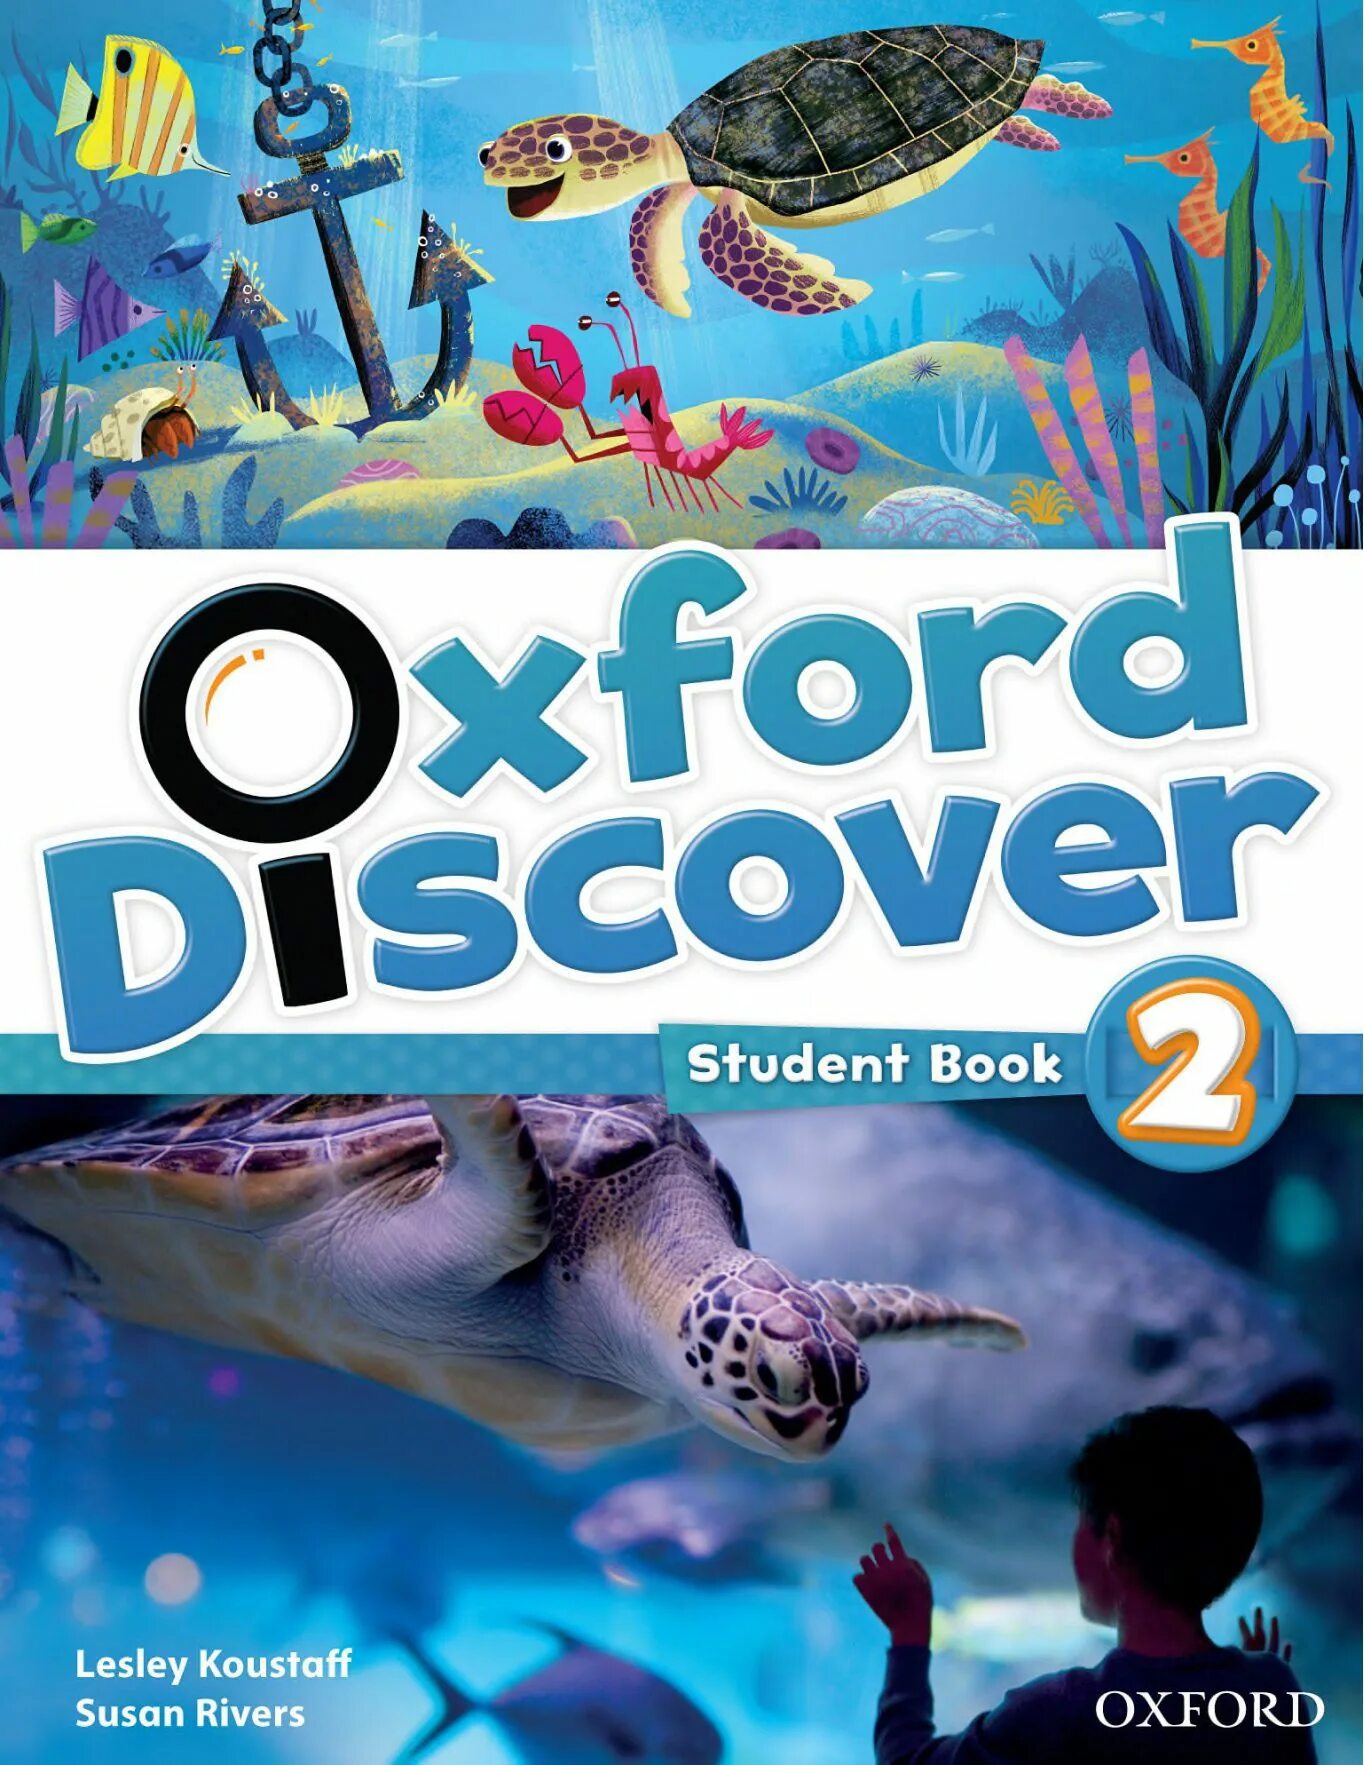 Oxford discover book. Oxford discover 2nd Edition. Oxford Discovery 2. Oxford discover 1 student book. Oxford Discovery student's book.